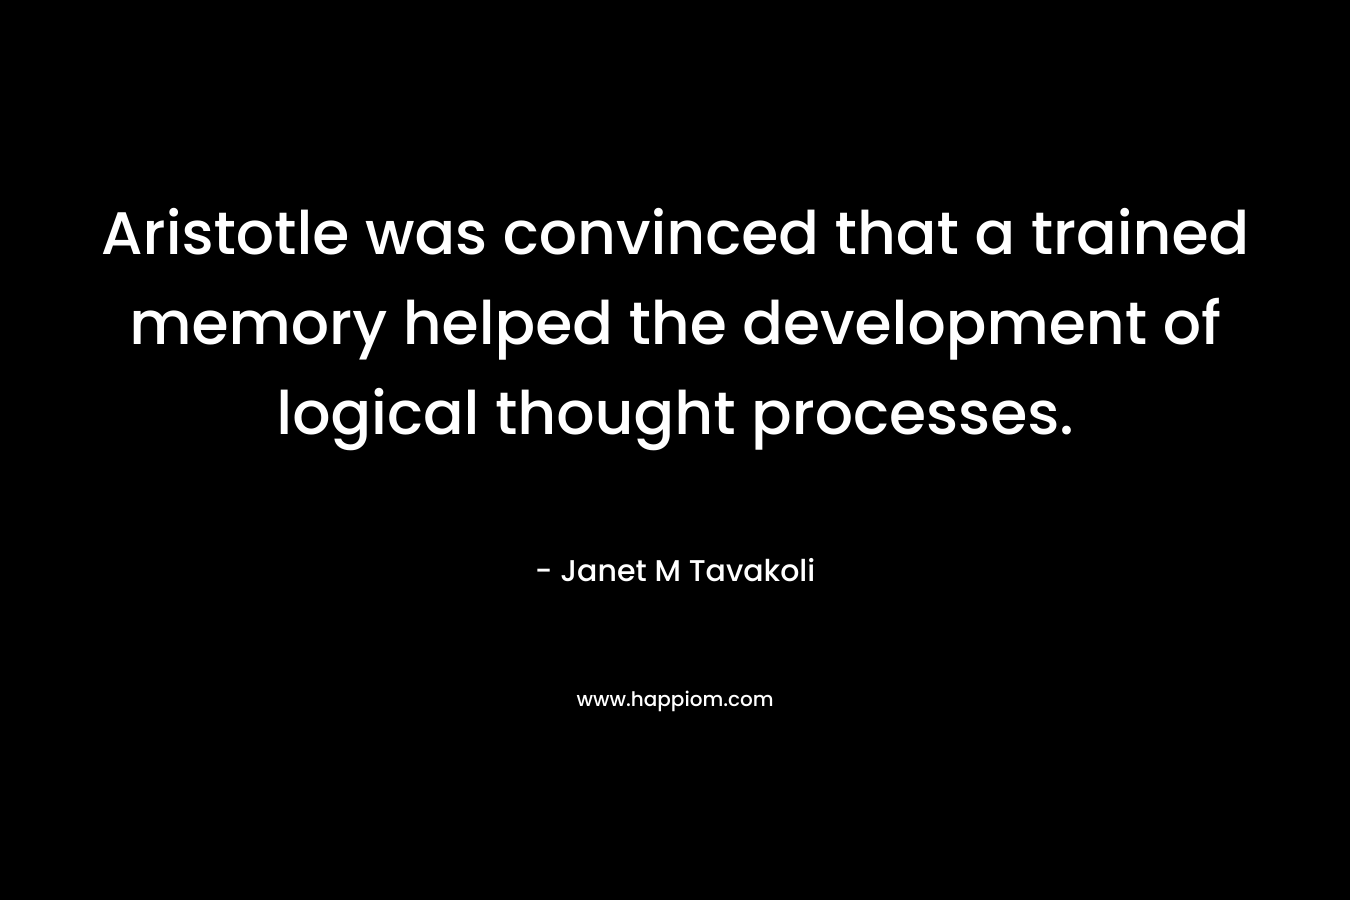 Aristotle was convinced that a trained memory helped the development of logical thought processes.